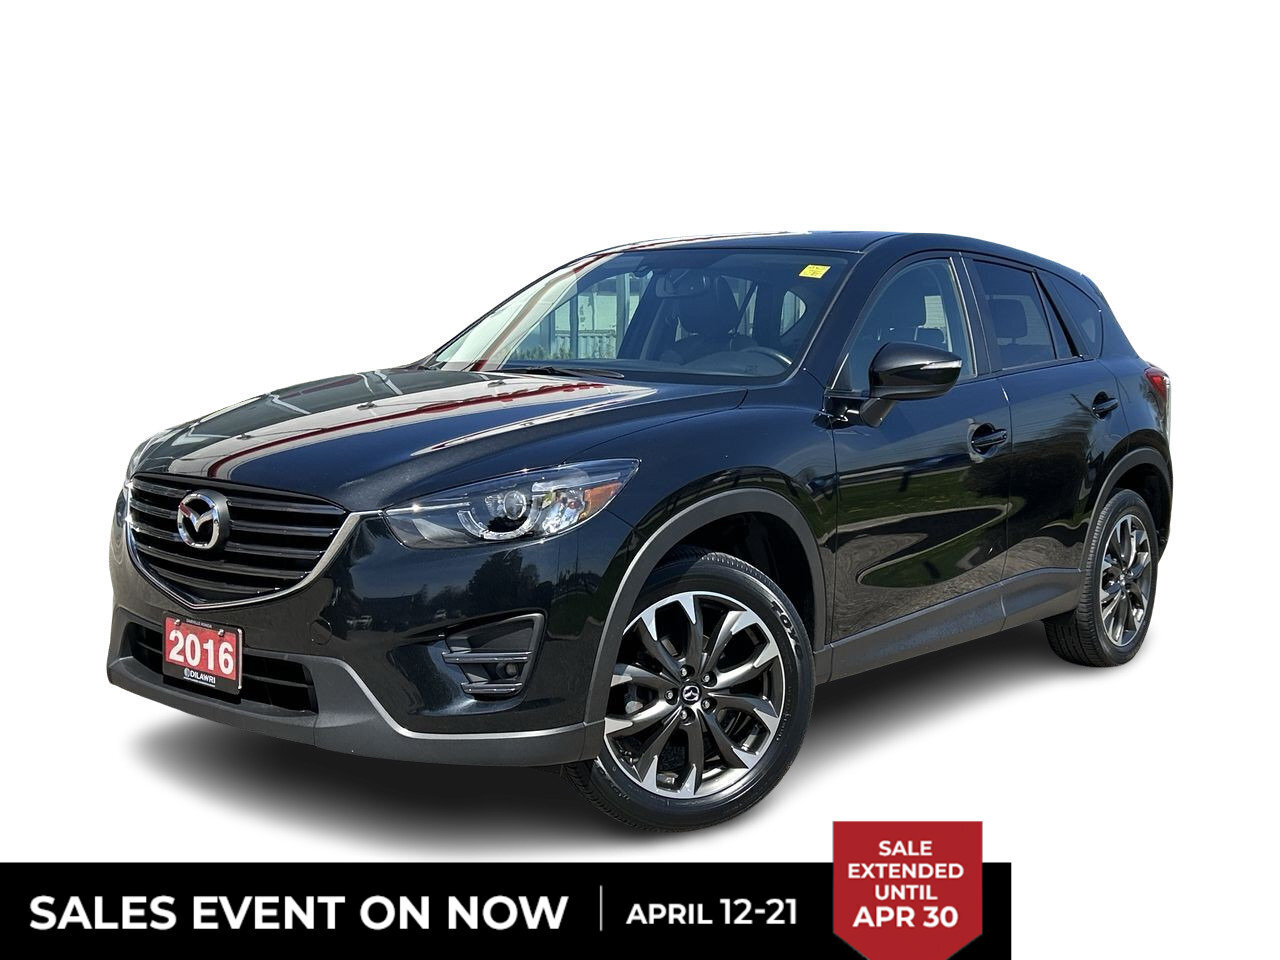 2016 Mazda CX-5 GT AWD at Leather | Sunroof | Navigation / 